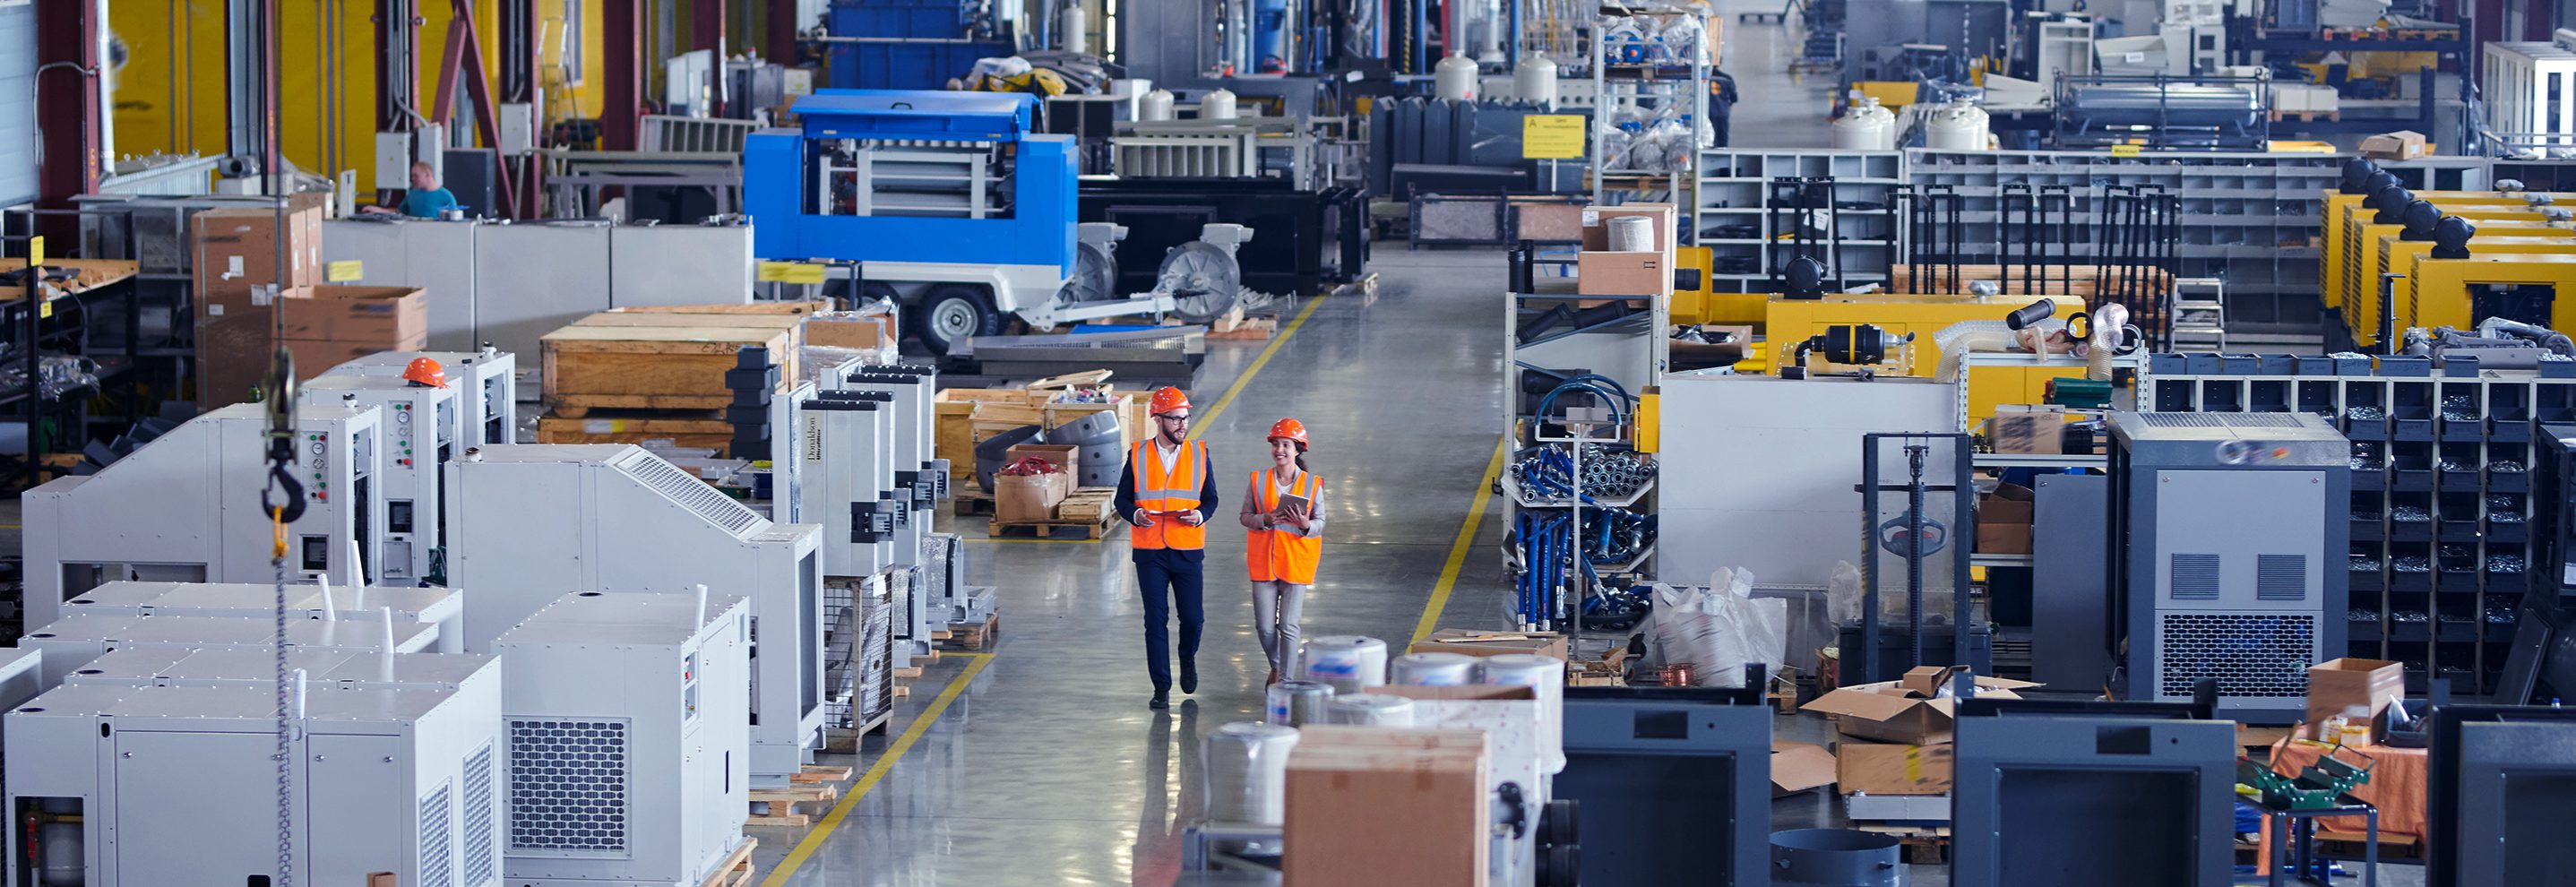 How we did it: Critical ops performance & improvement consultant to increase warehouse efficiency